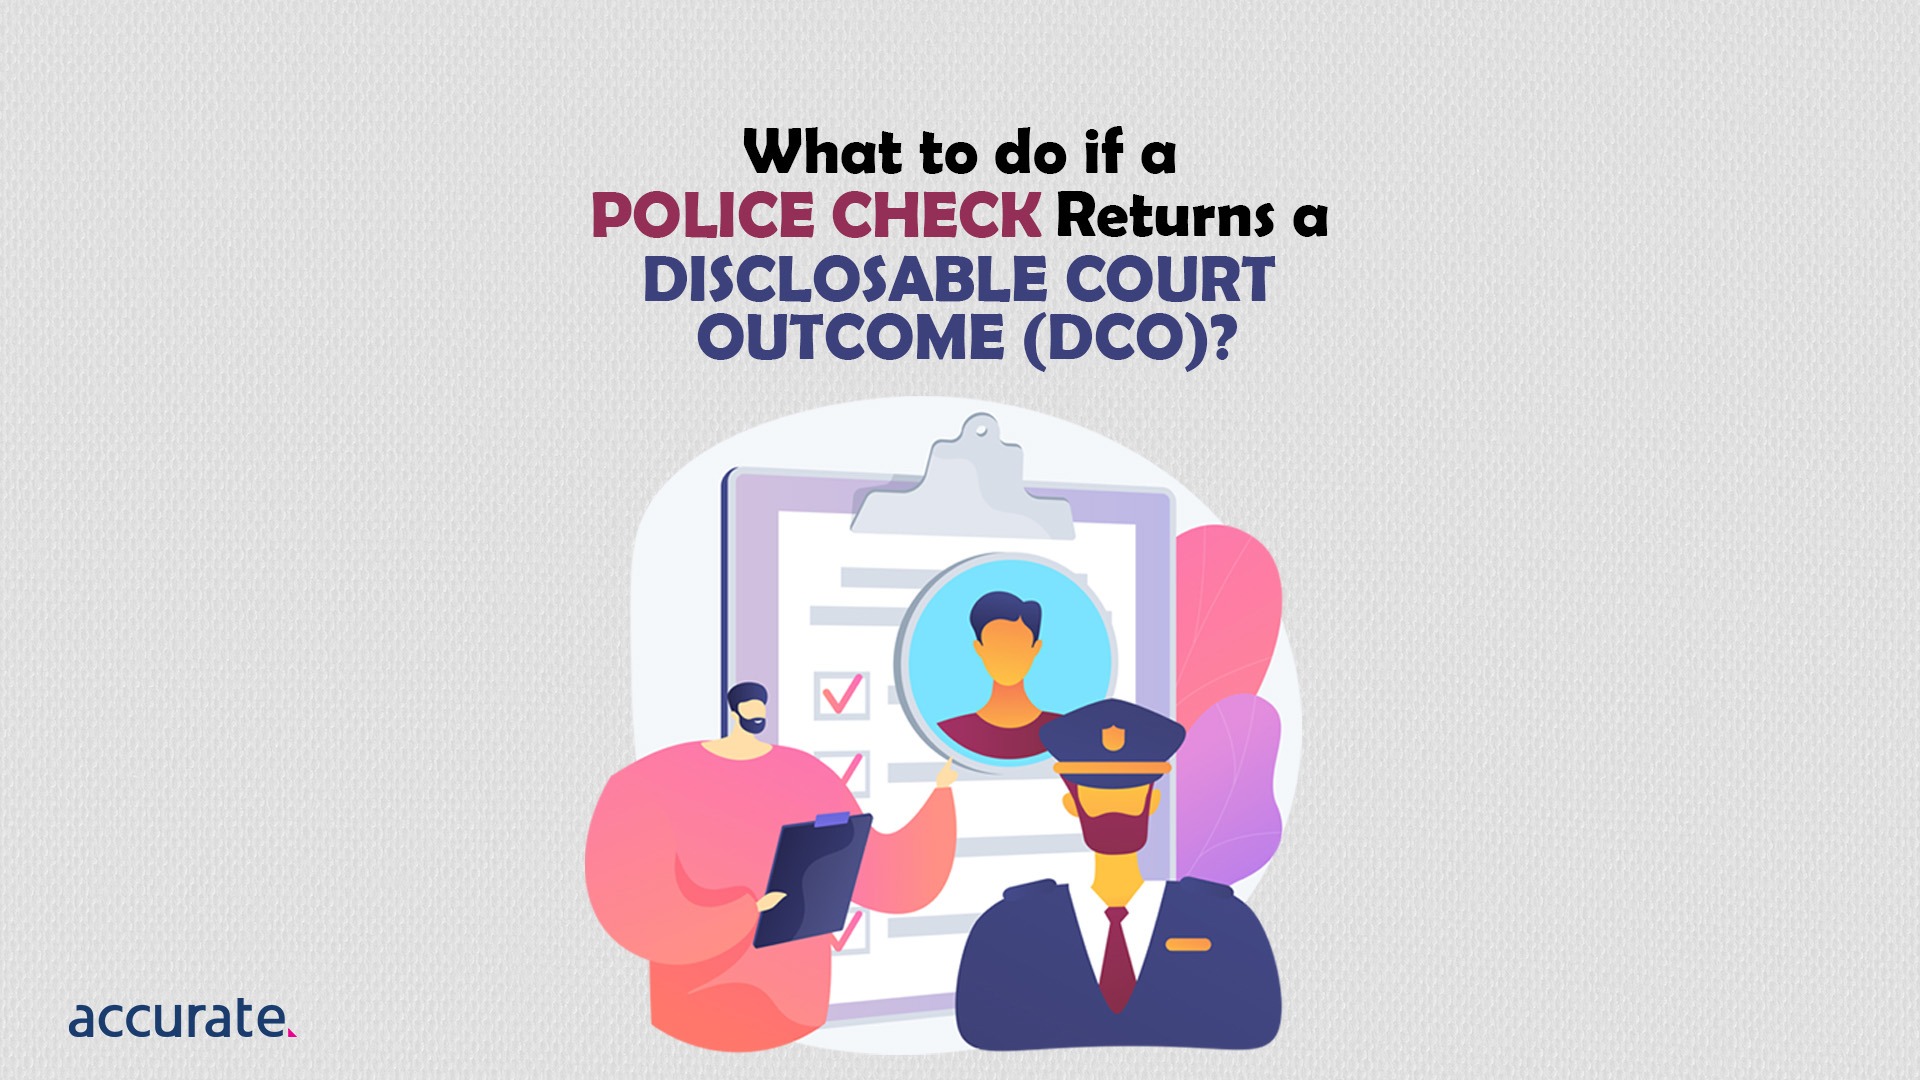 Featured Image - What to do if a Police Check Returns a Disclosable Court Outcome (DCO)?